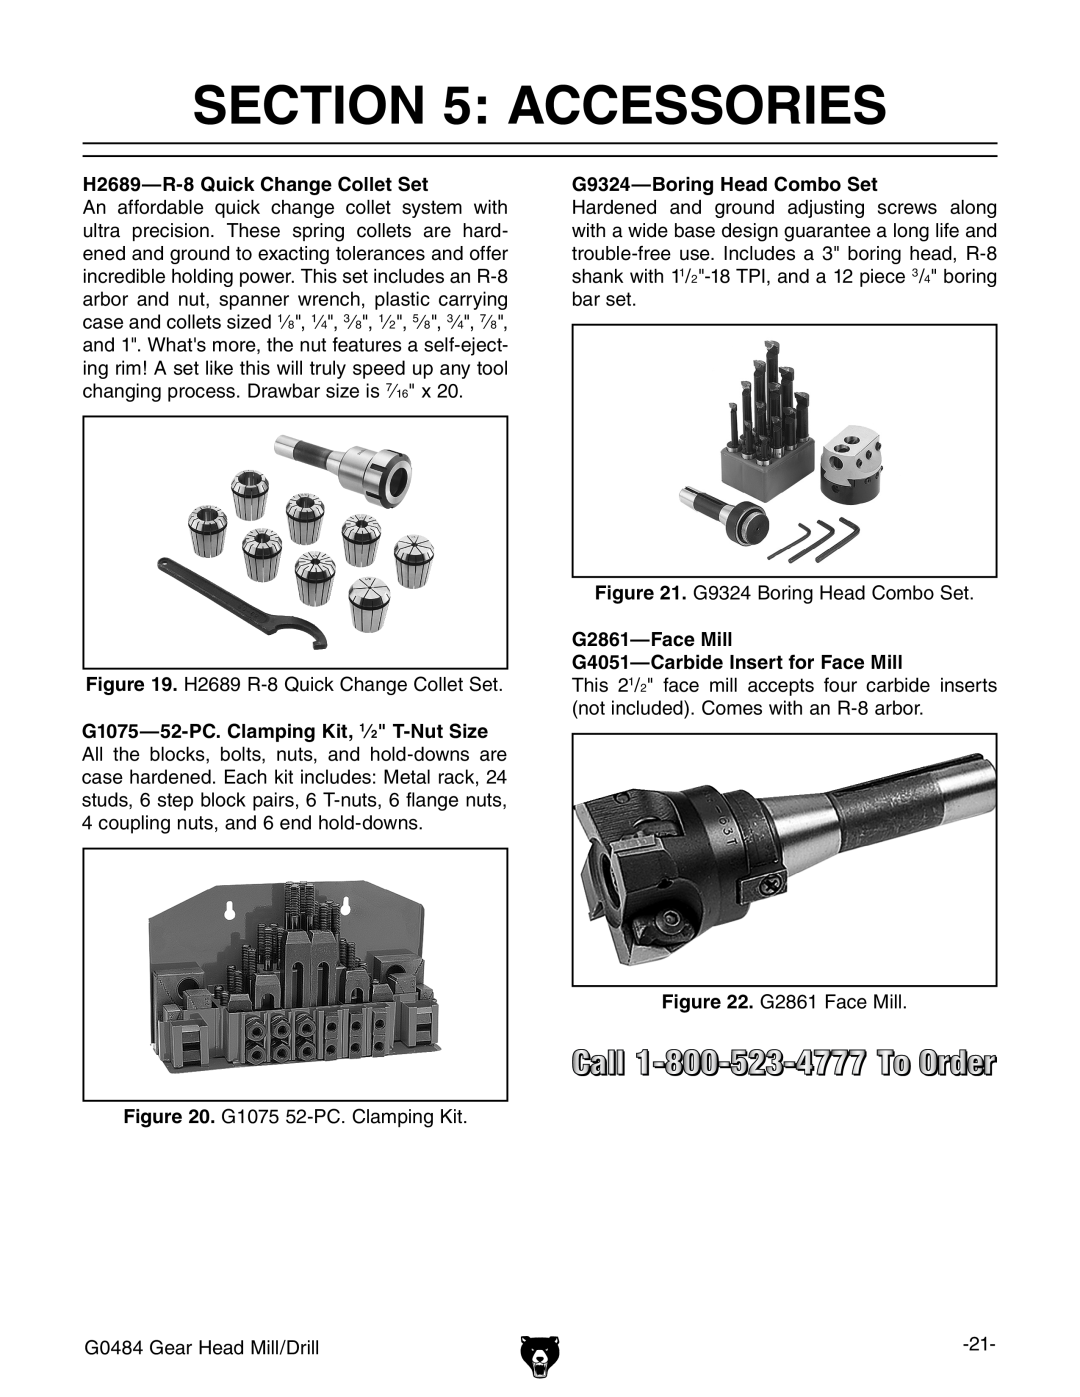 Grizzly G0484 owner manual Accessories, H2689-R-8 Quick Change Collet Set, G9324-Boring Head Combo Set 